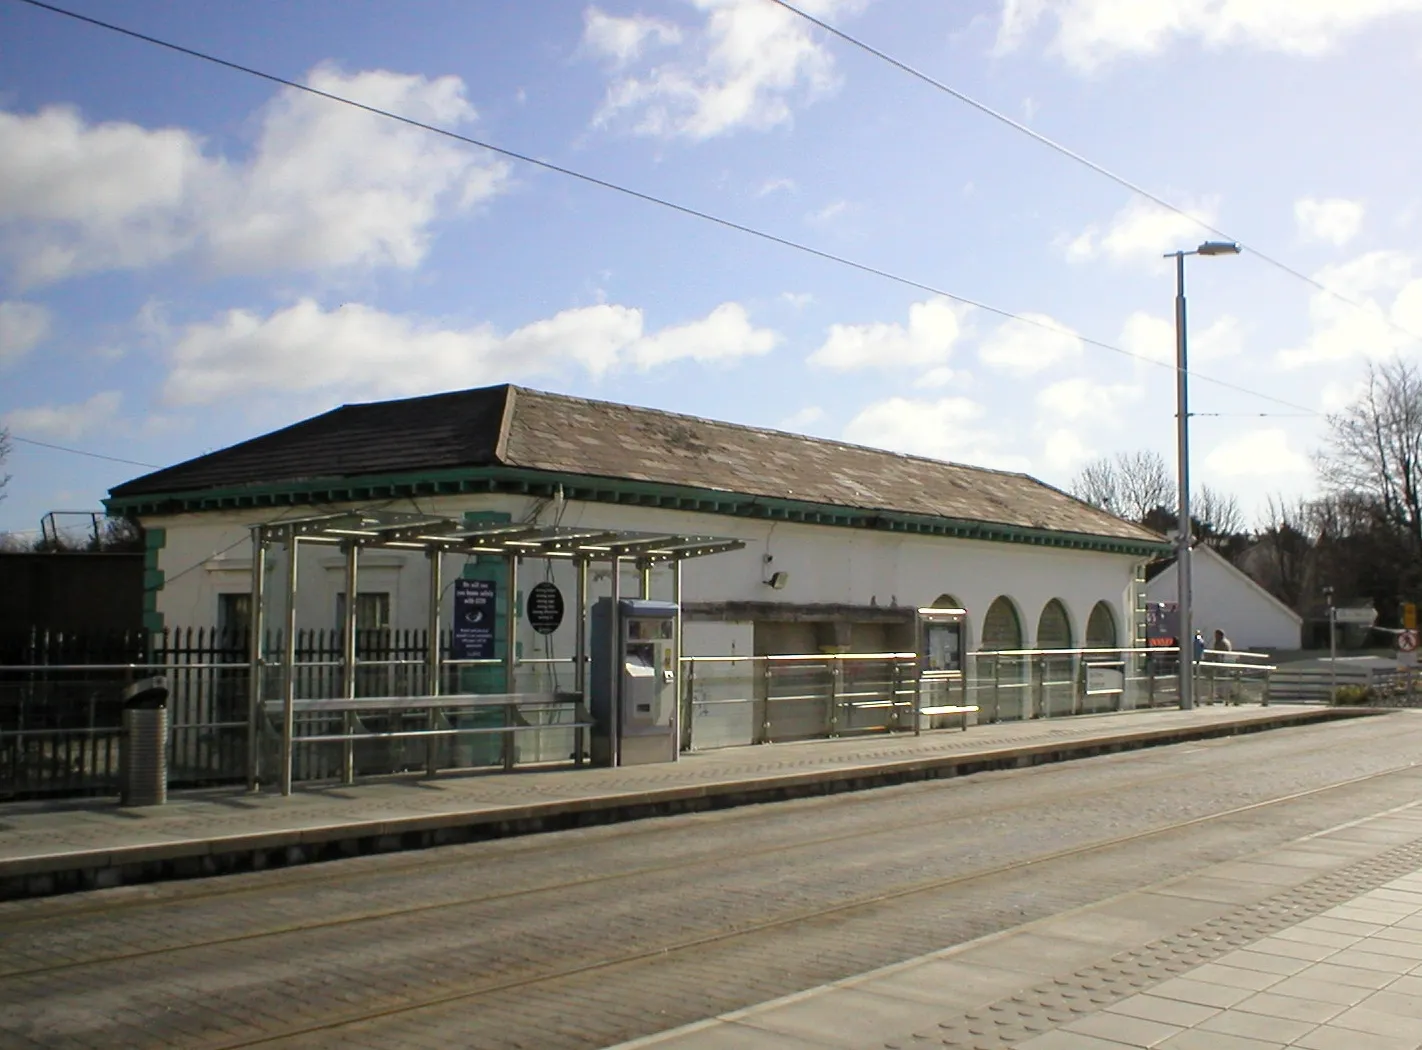 Photo showing: The original Dundrum station built by William Dargan in 1854 behind the modern Luas halt